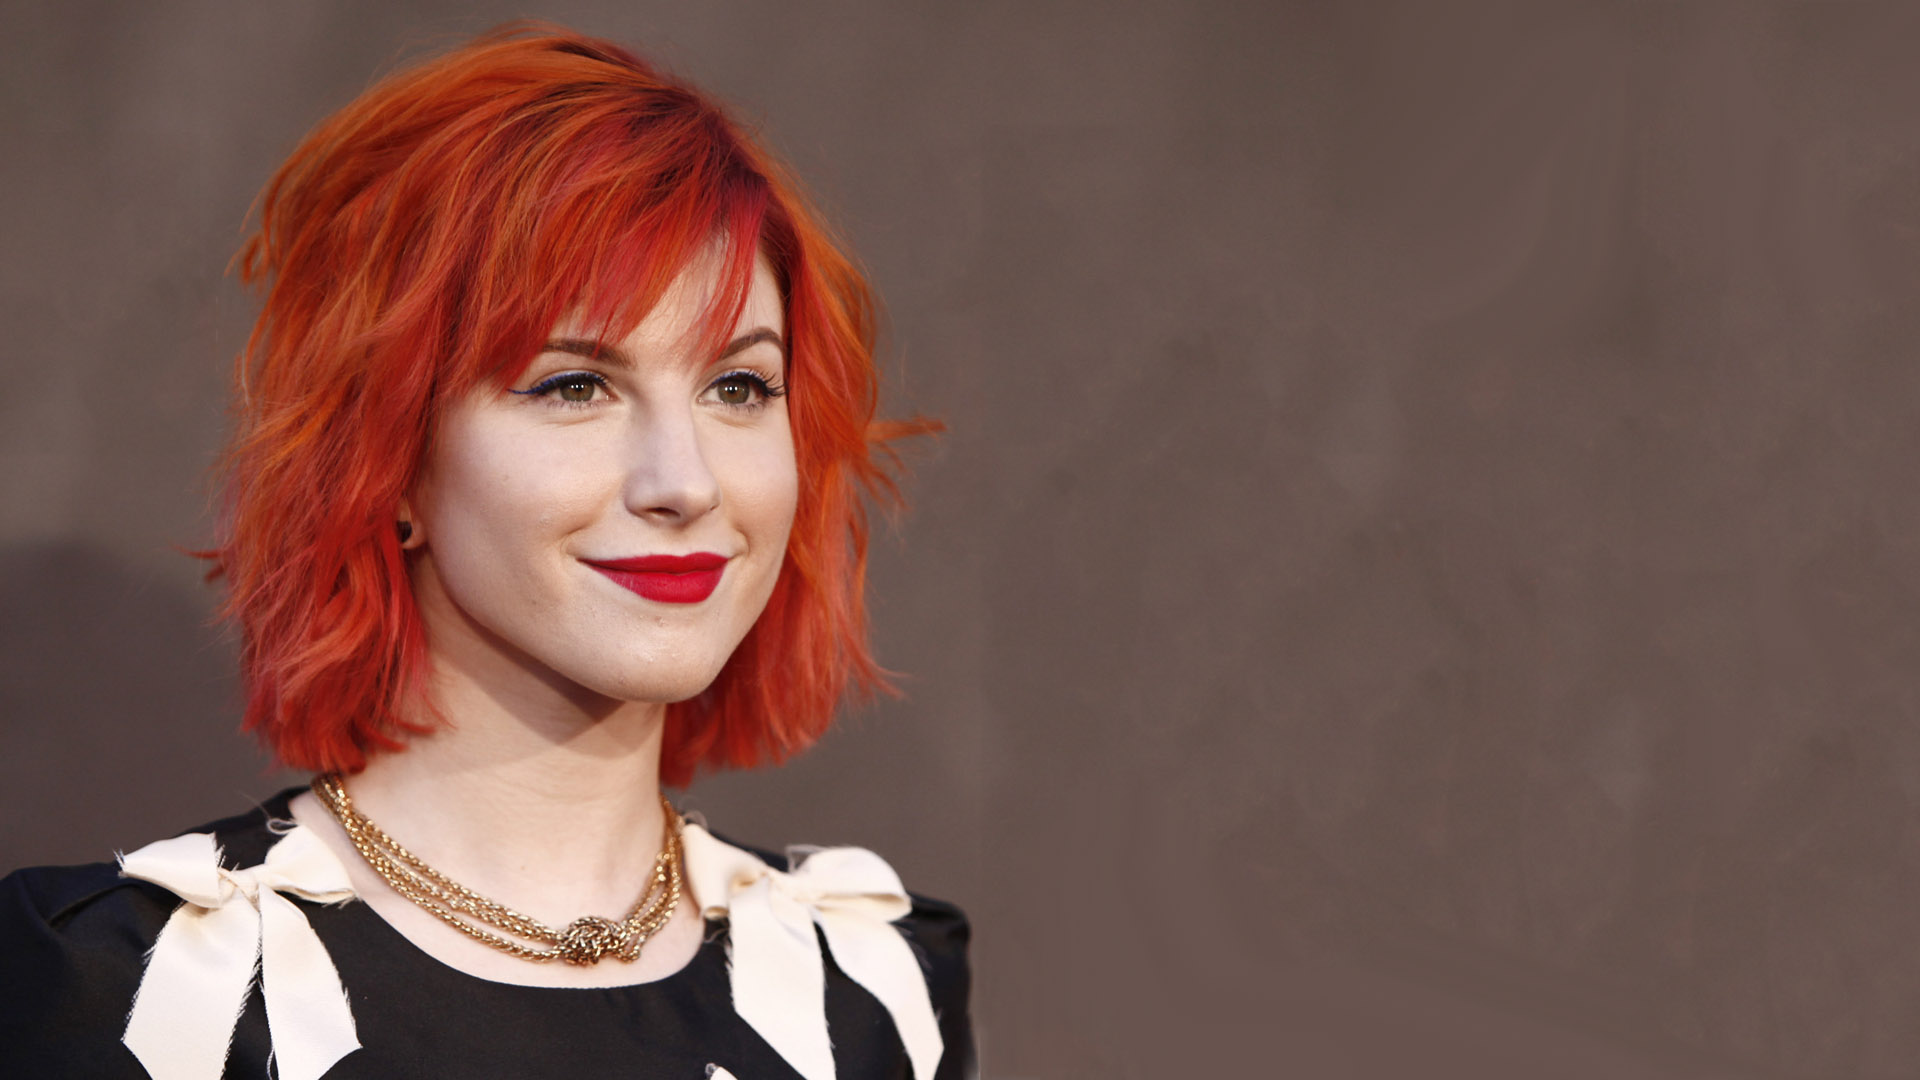 Free download wallpaper Music, Singer, American, Hayley Williams, Red Hair, Lipstick on your PC desktop